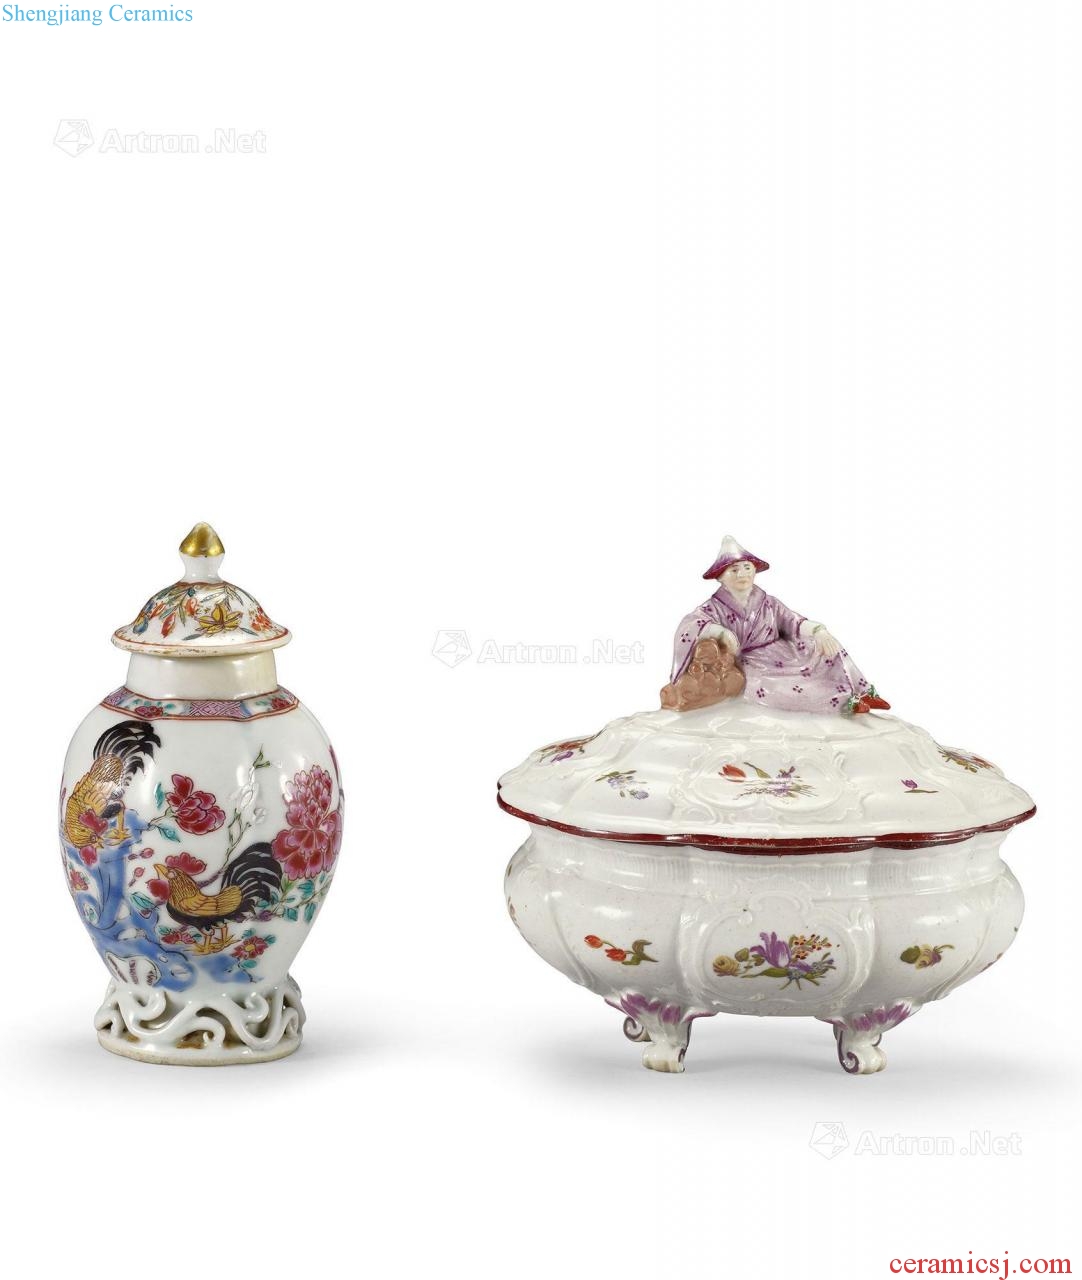 In the eighteenth century Pastel rooster capping, pastel flowers lines character button box cover two things (group a)